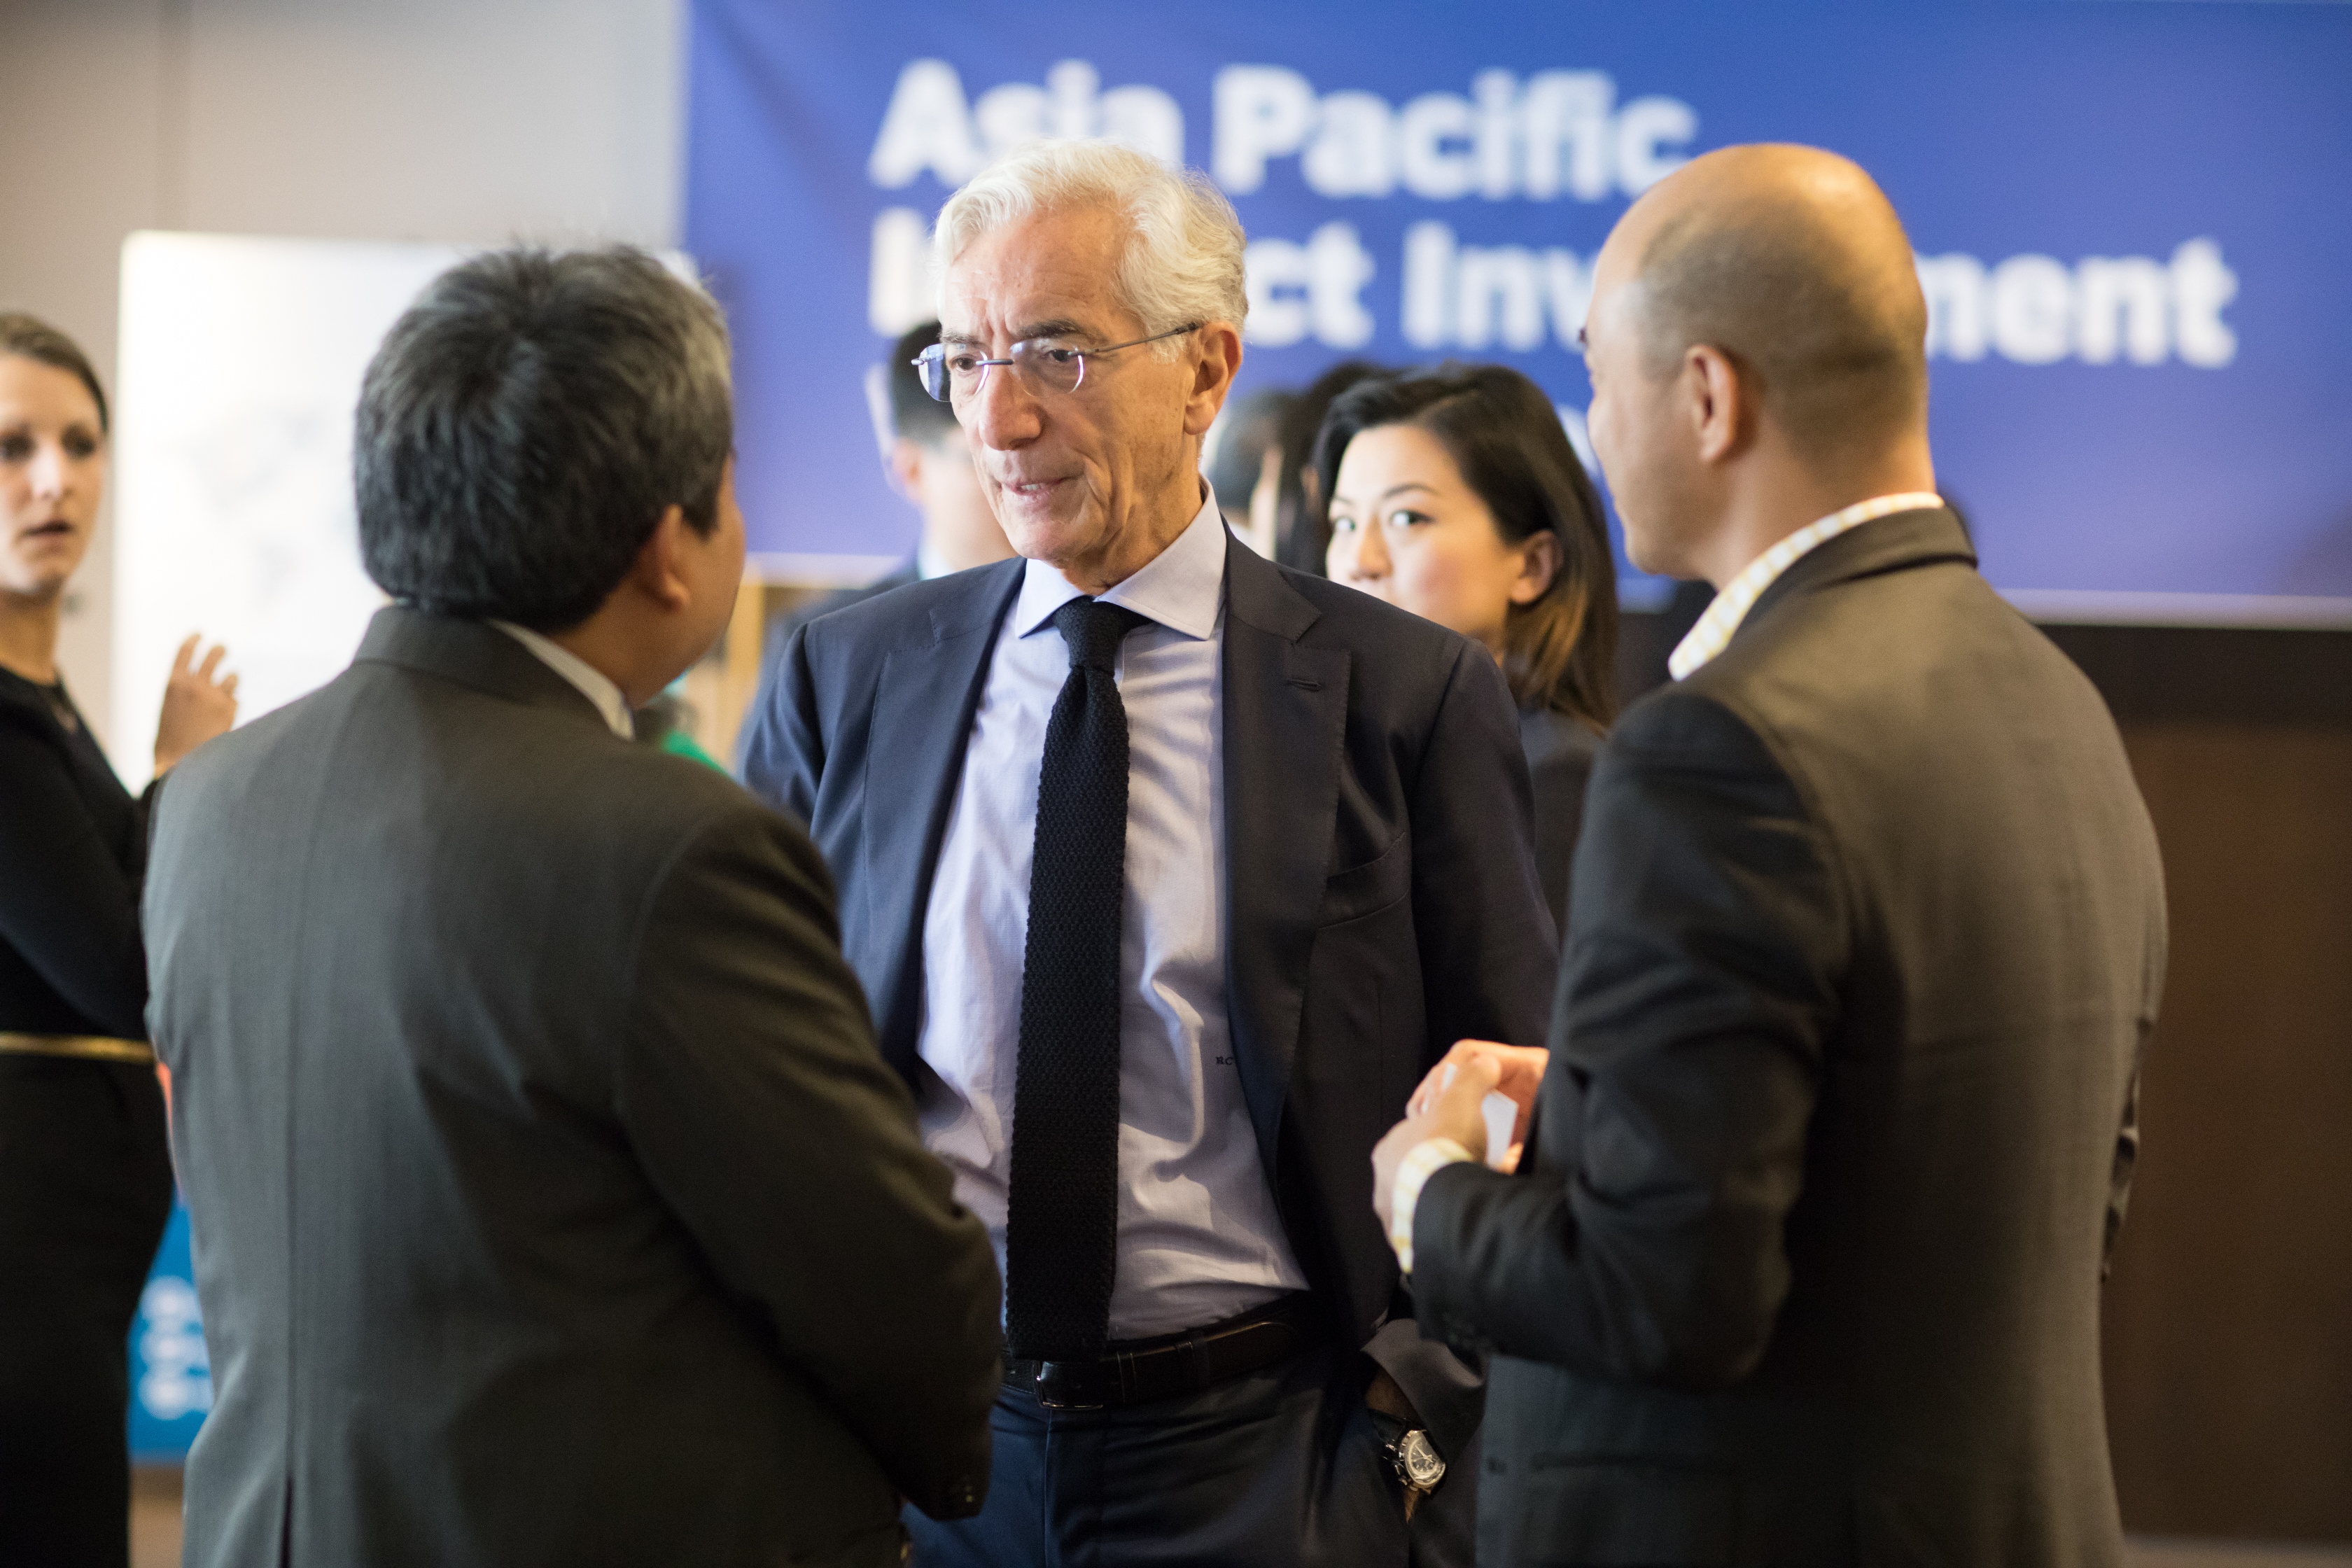 British Council, Global Social Impact Investment Steering Group, Sir Ronald Cohen